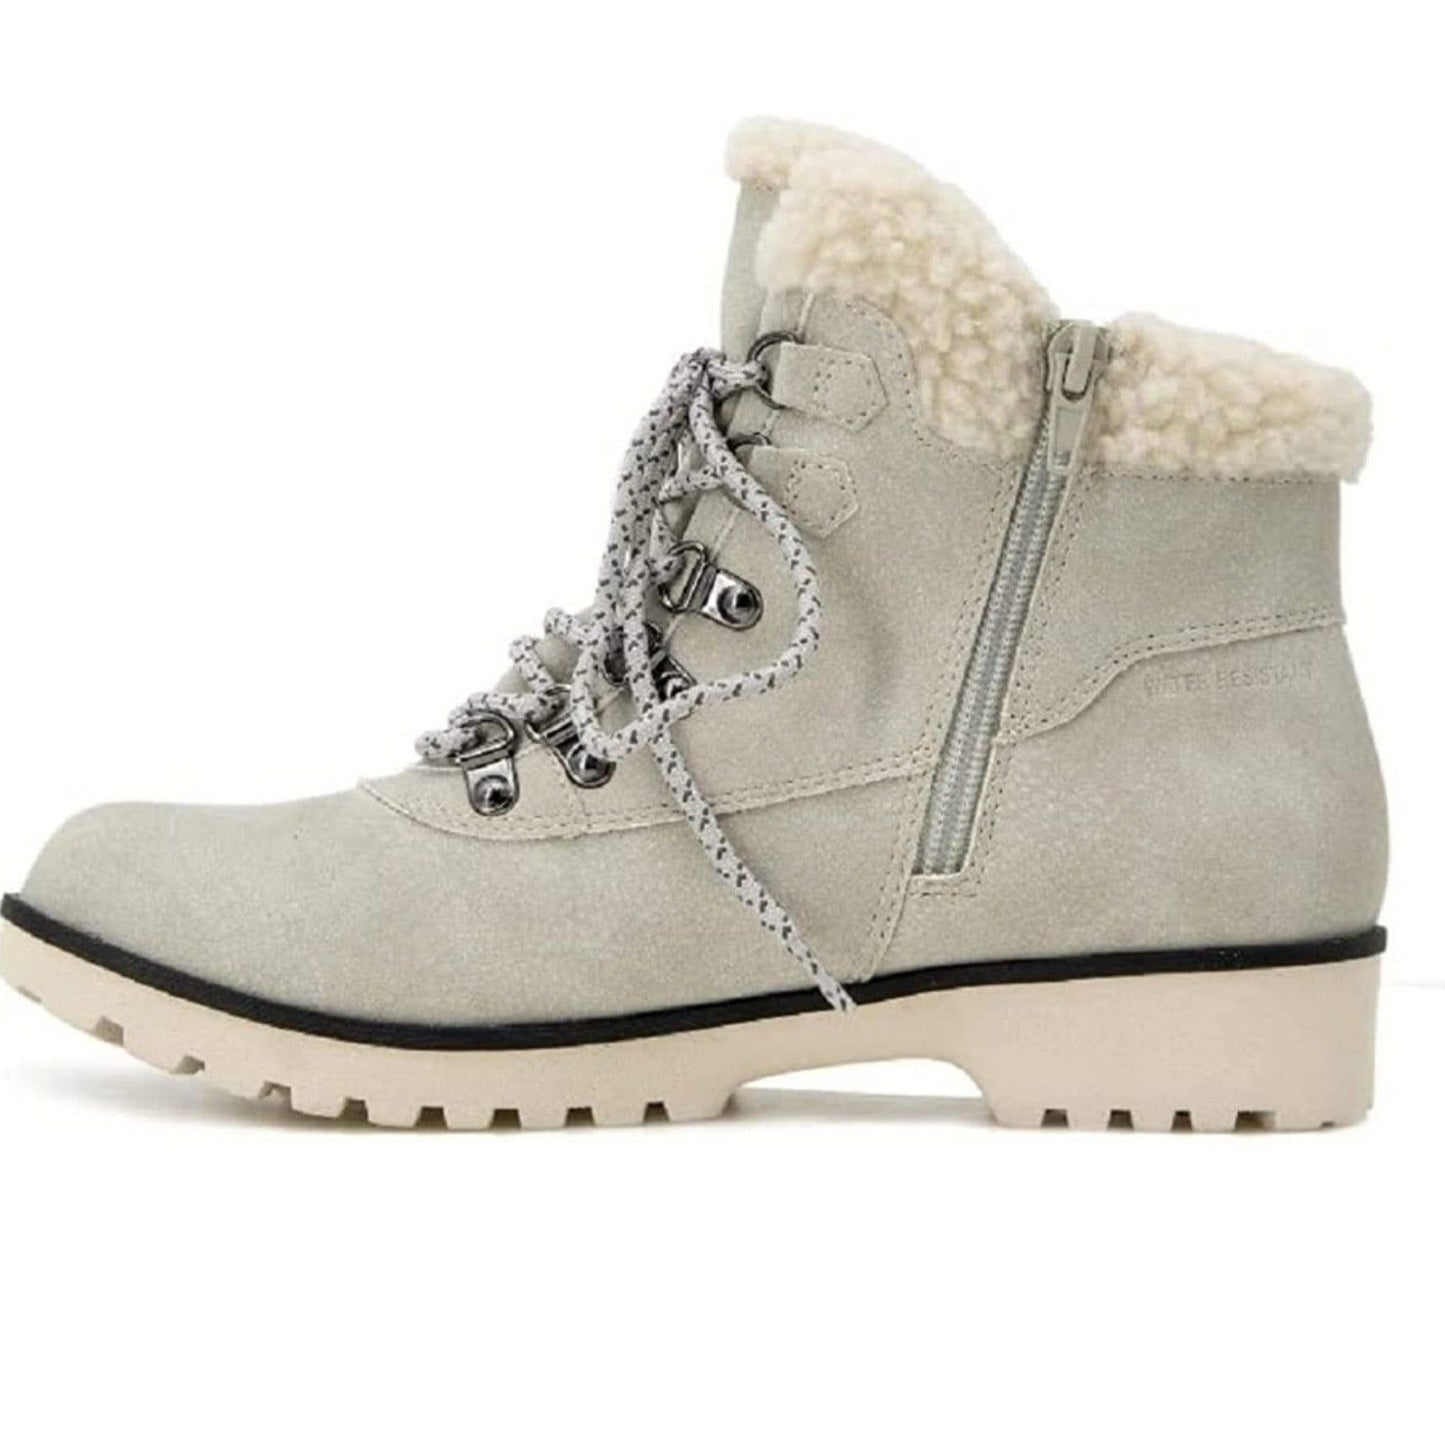 JSPORT Boots Woman's Faux Fur Shearling Hiking Outdoor Weather Ready shoes